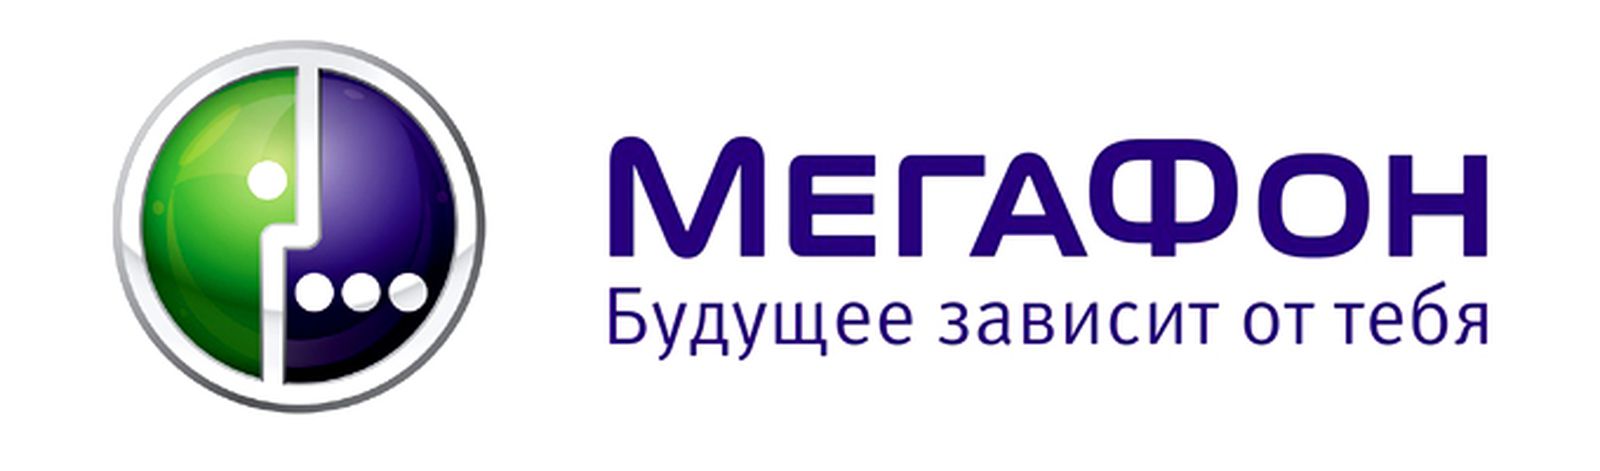 Russia's Megafon Signs Multi-Year iPhone Distribution Deal with